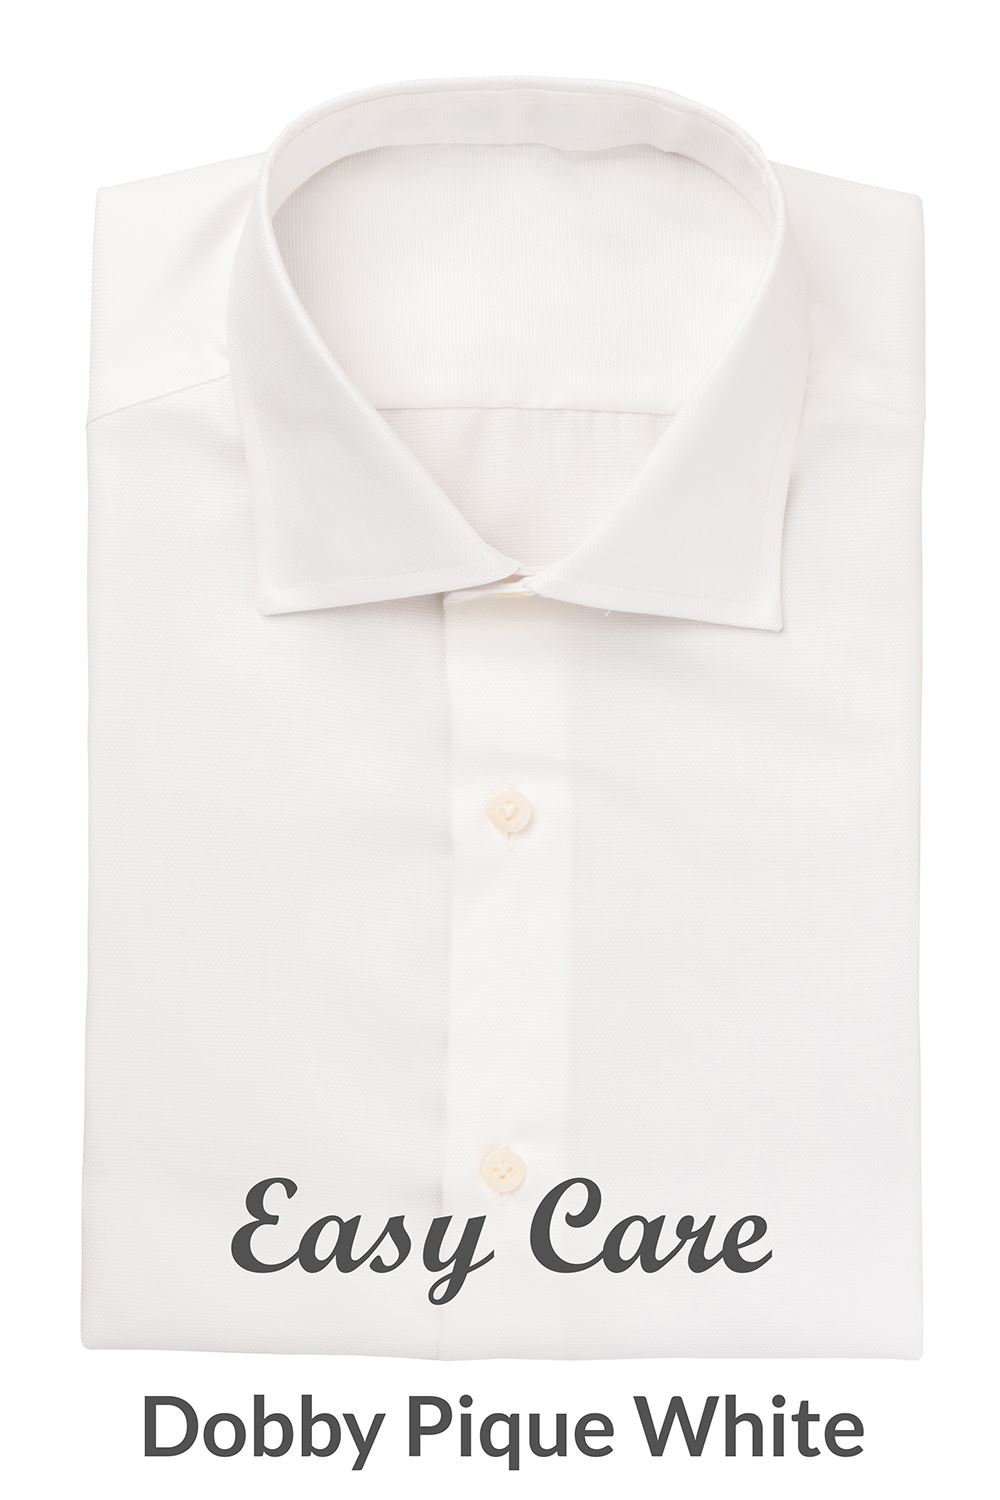 SFE3076 – Medium Weight, White Easy Care Pique Weave , Soft Touch